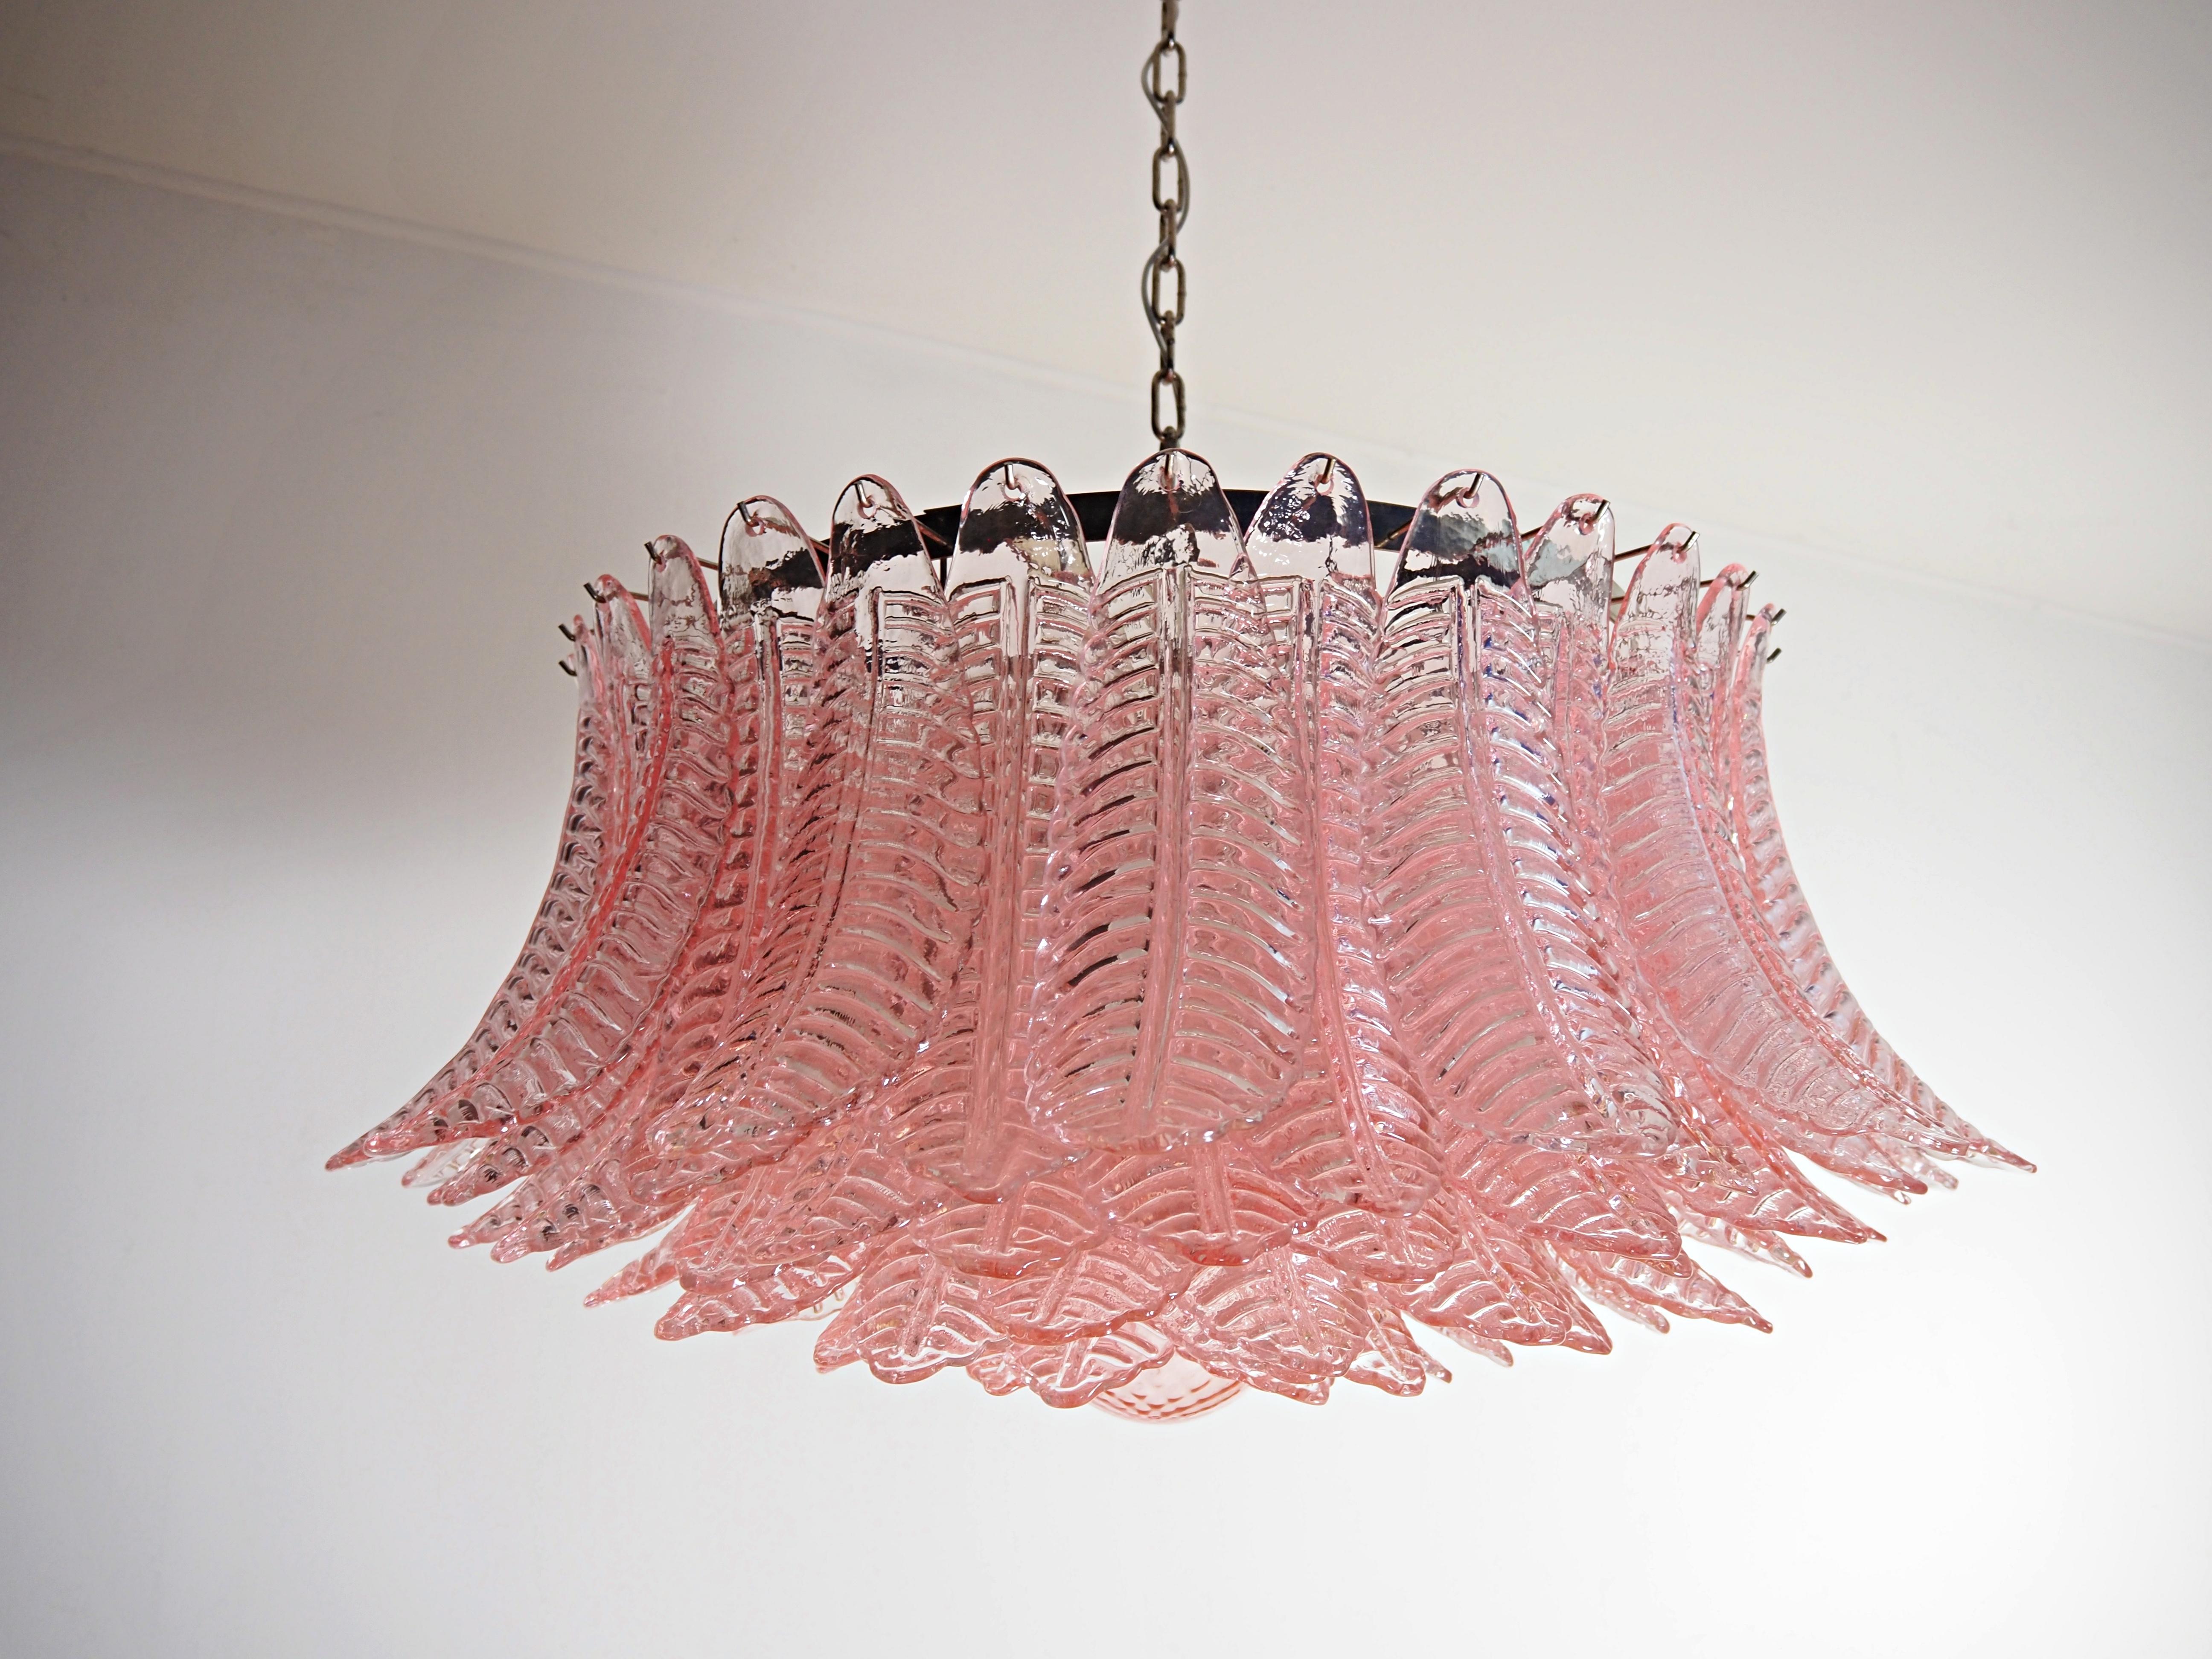 Italian vintage chandelier in Murano glass and nickel plated metal structure. The polished nickel armor supports 100 large pink glass leaves ferns plus a glass sphere used as a pink finish. Can be used as a chandelier with chain, or as a ceiling